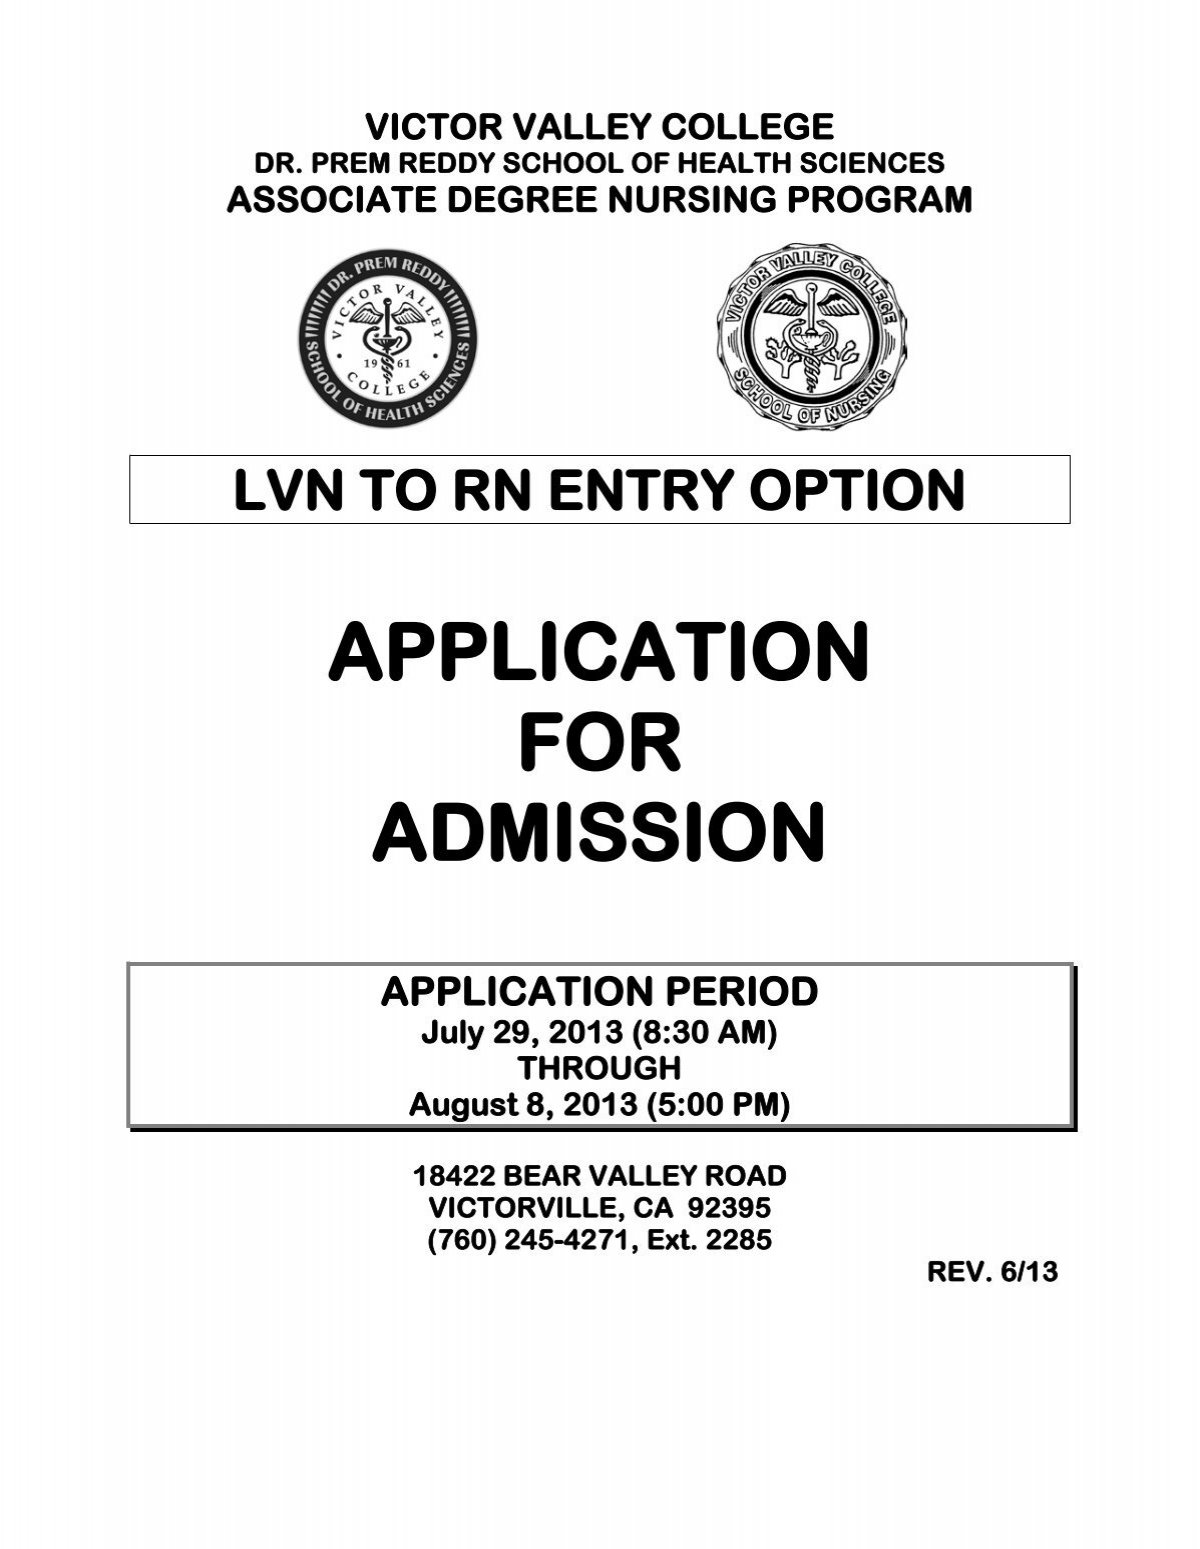 lvn to rn entry option application for admission - Victor Valley College